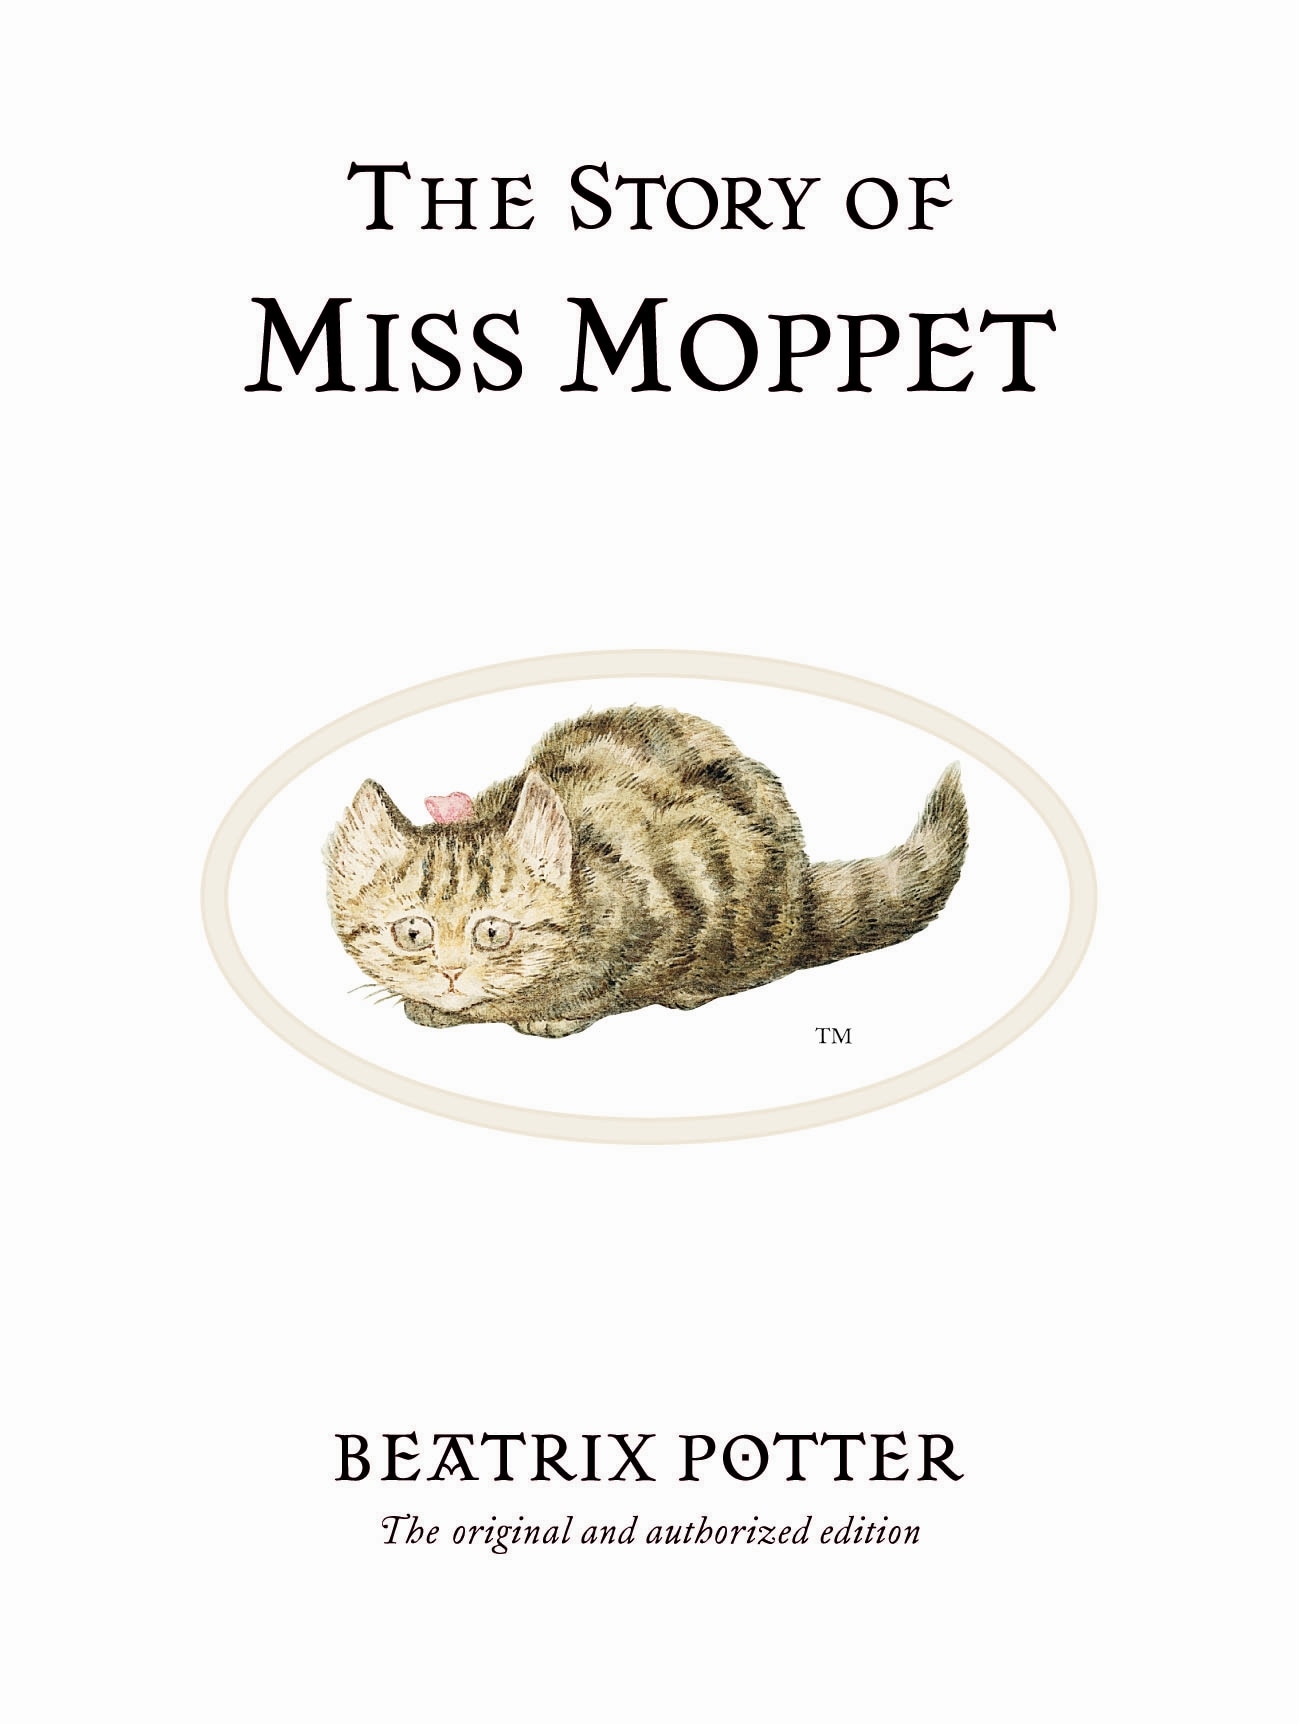 Book “The Story of Miss Moppet” by Beatrix Potter — March 7, 2002